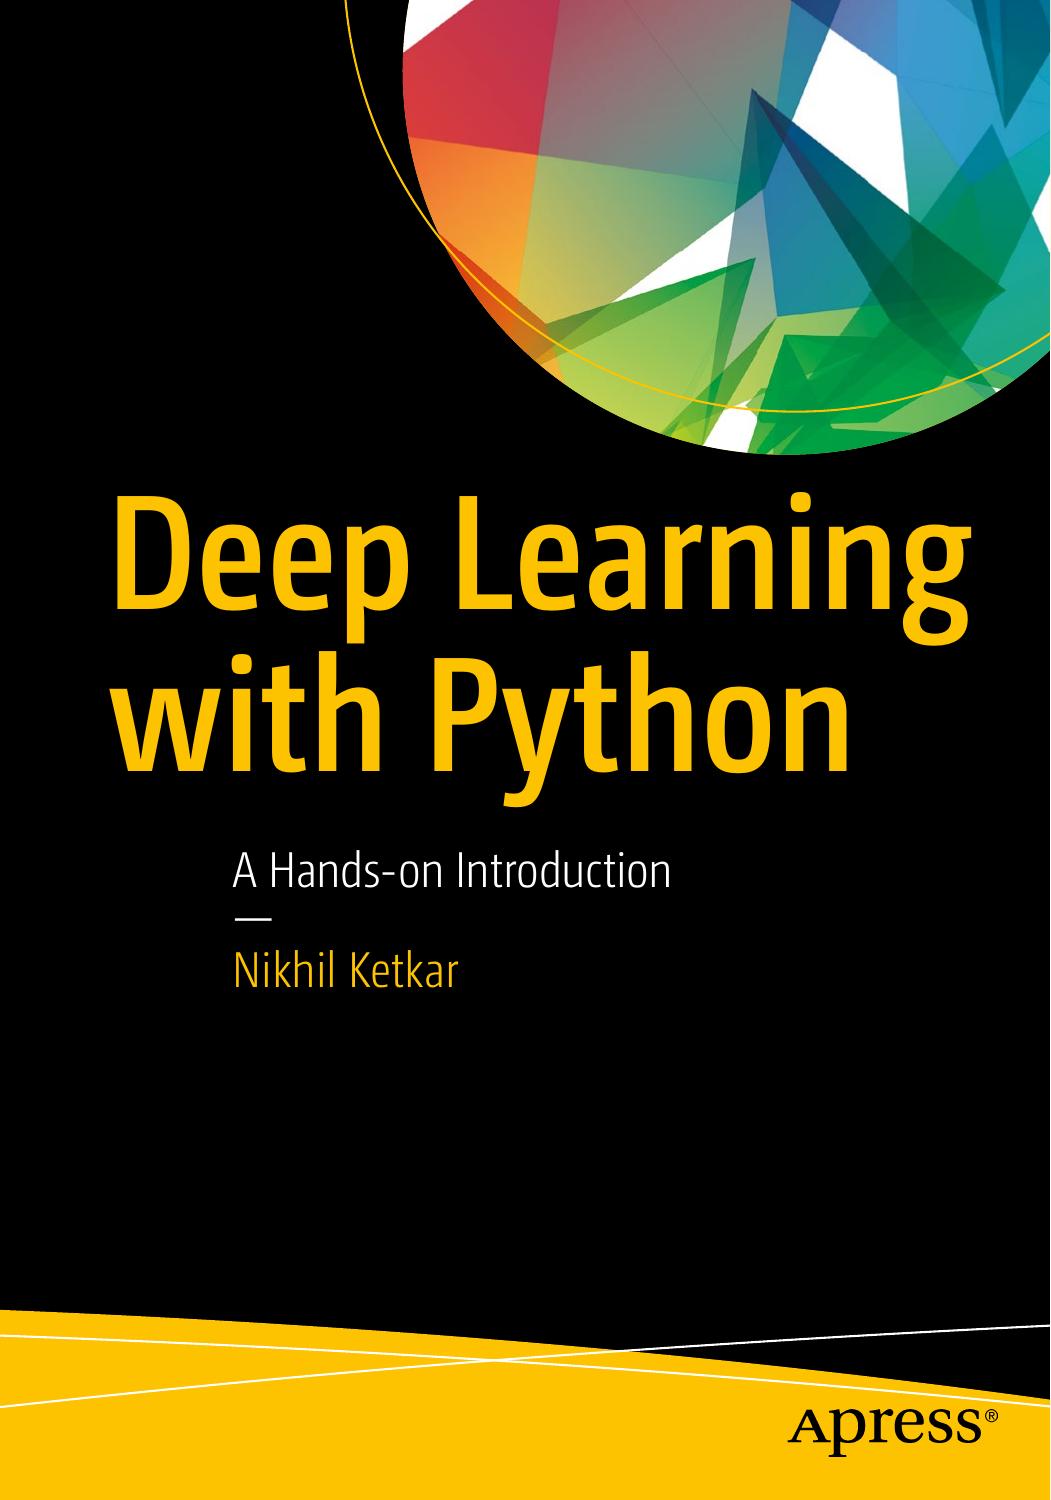 Deep Learning with Python 2017